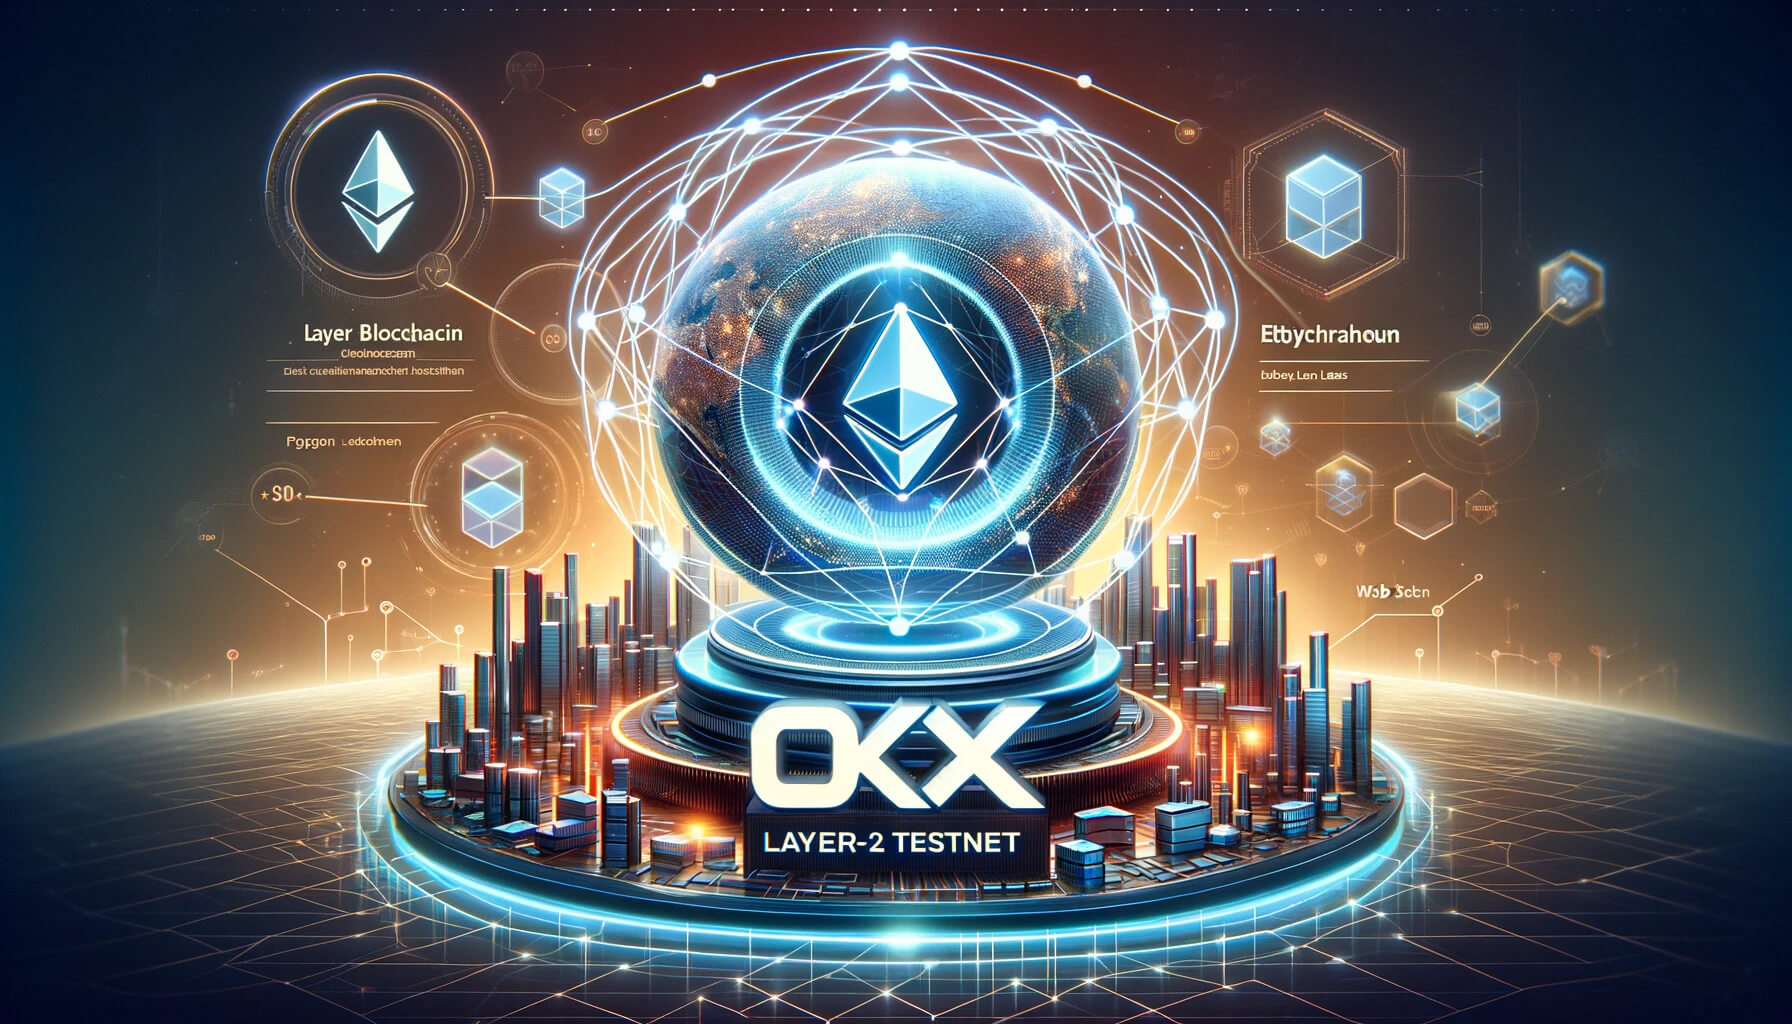 DALL%C2%B7E 2023 11 14 13.50.03 Create a compelling cover image for the collaboration between OKX and Polygon Labs on the X1 testnet. The design should emphasize the concept of a L